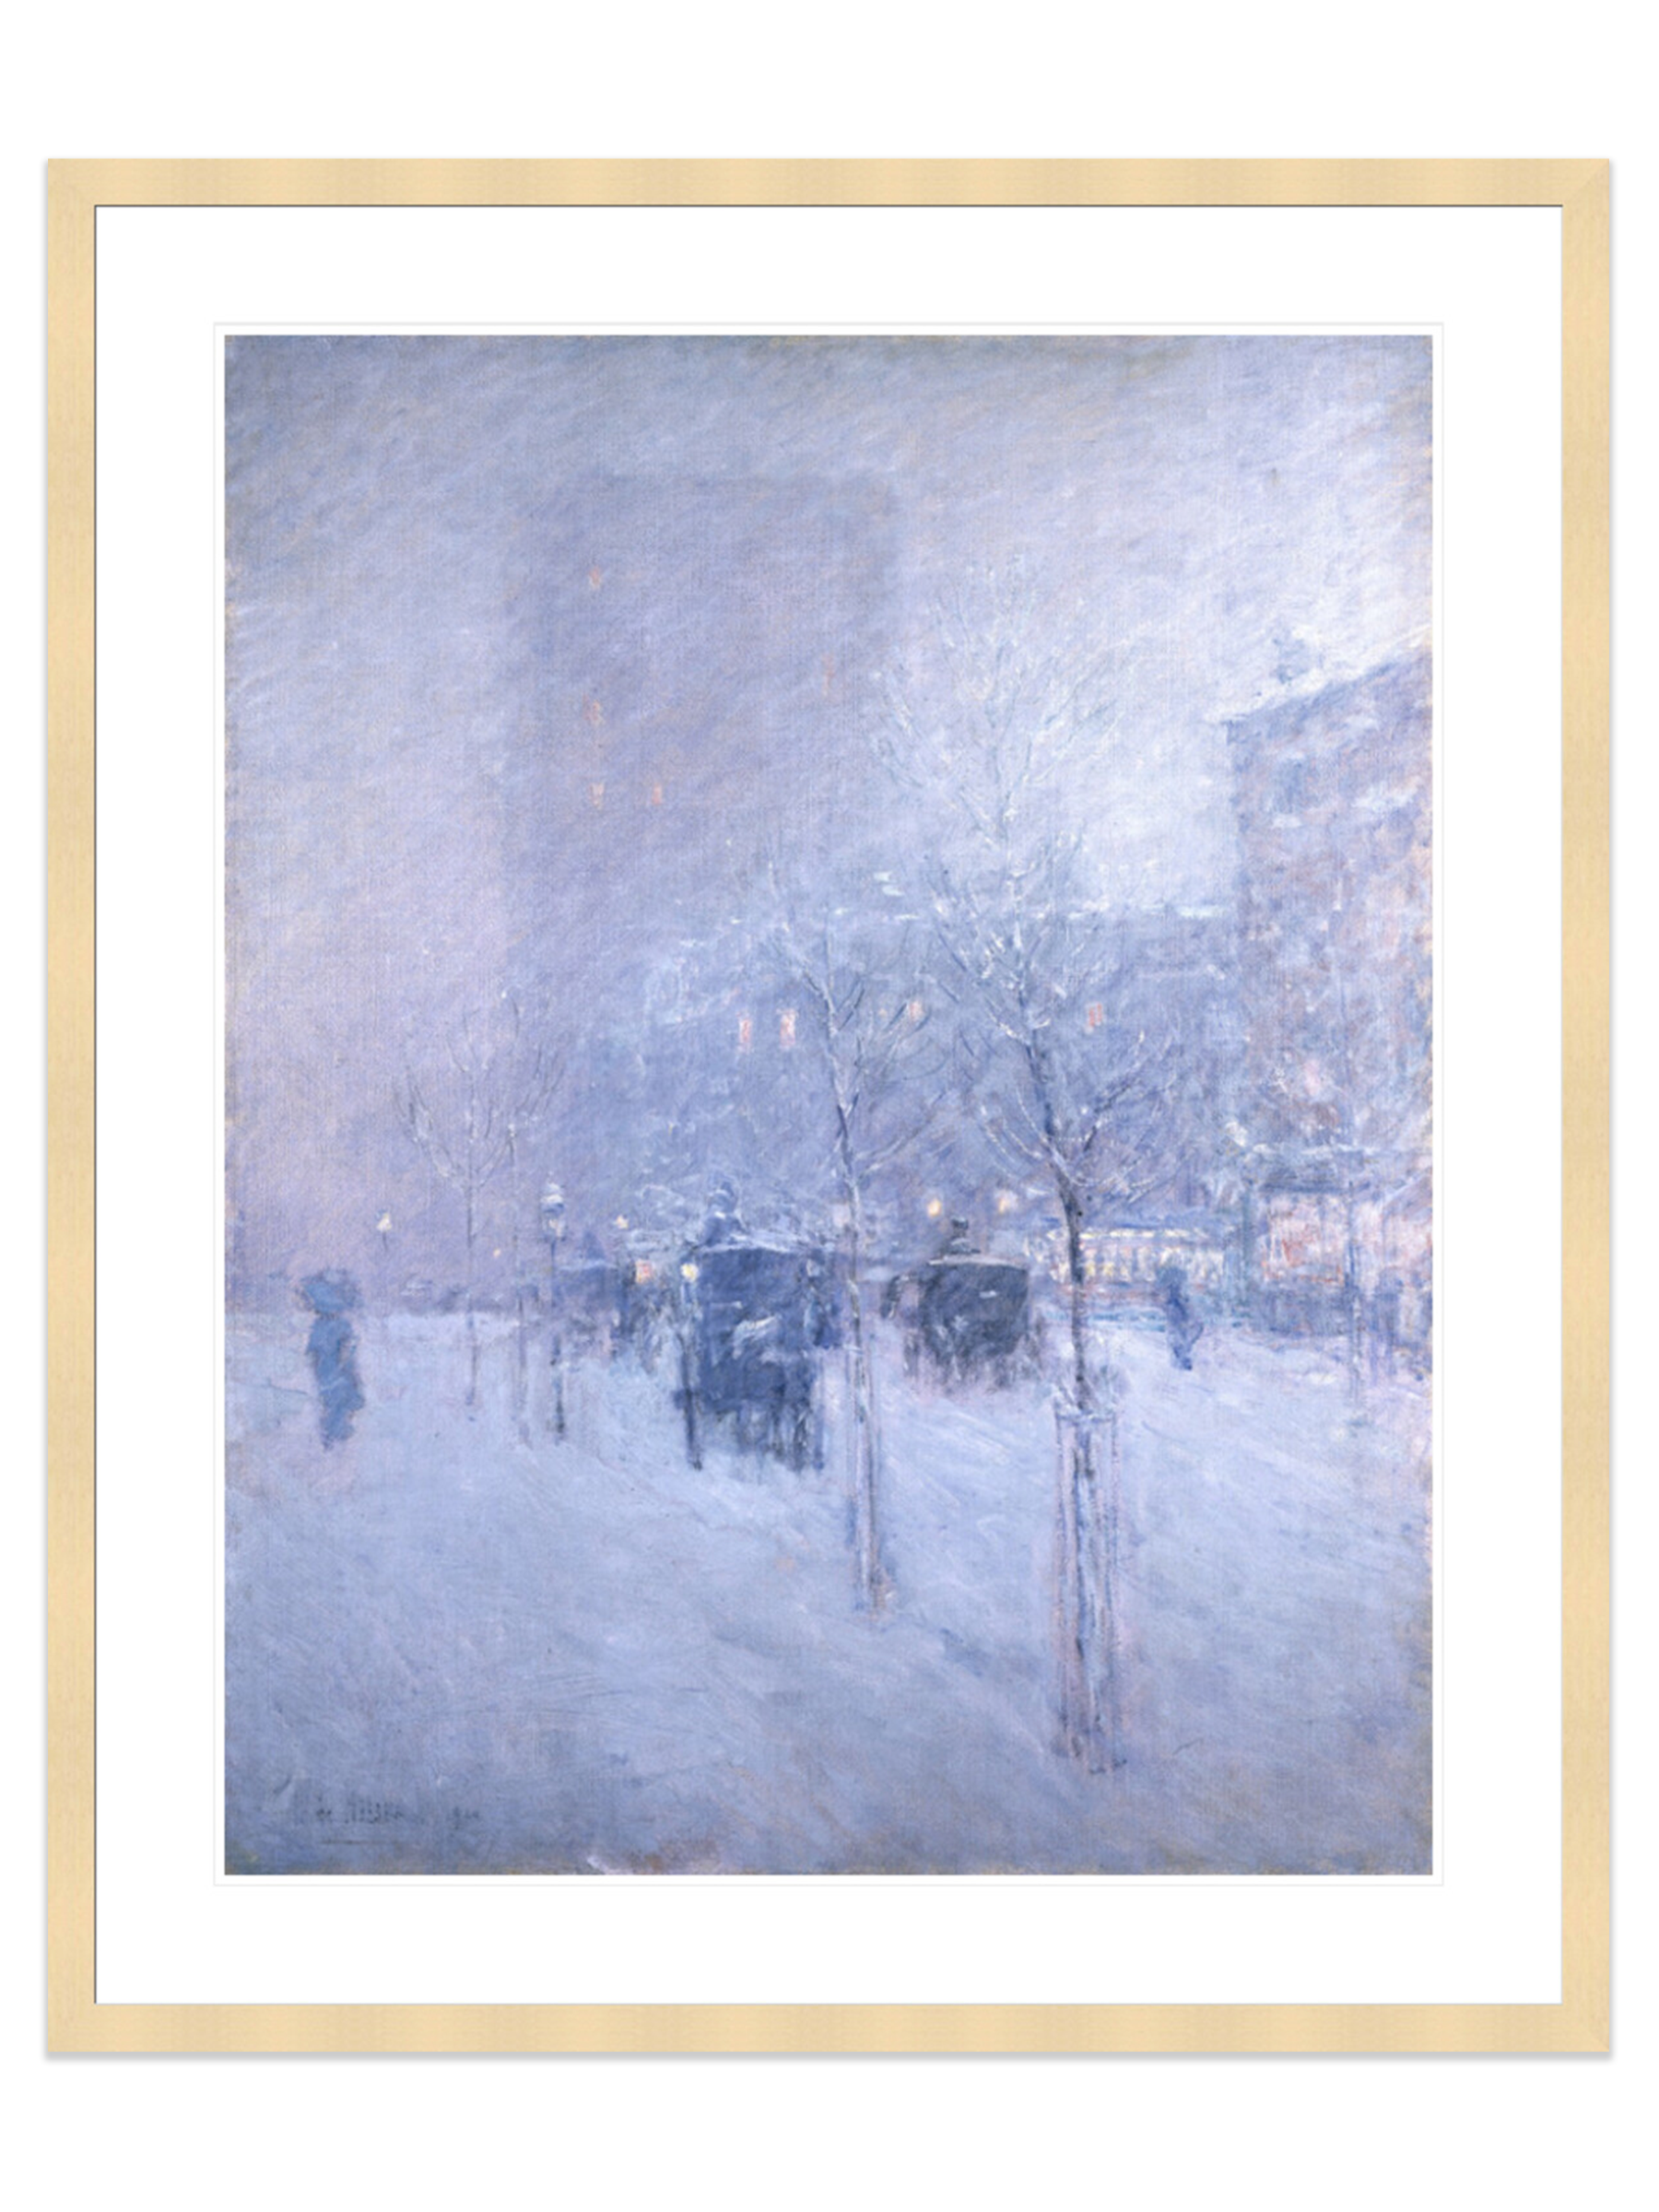 Late Afternoon, New York, Winter (Print) by Frederick Childe Hassam